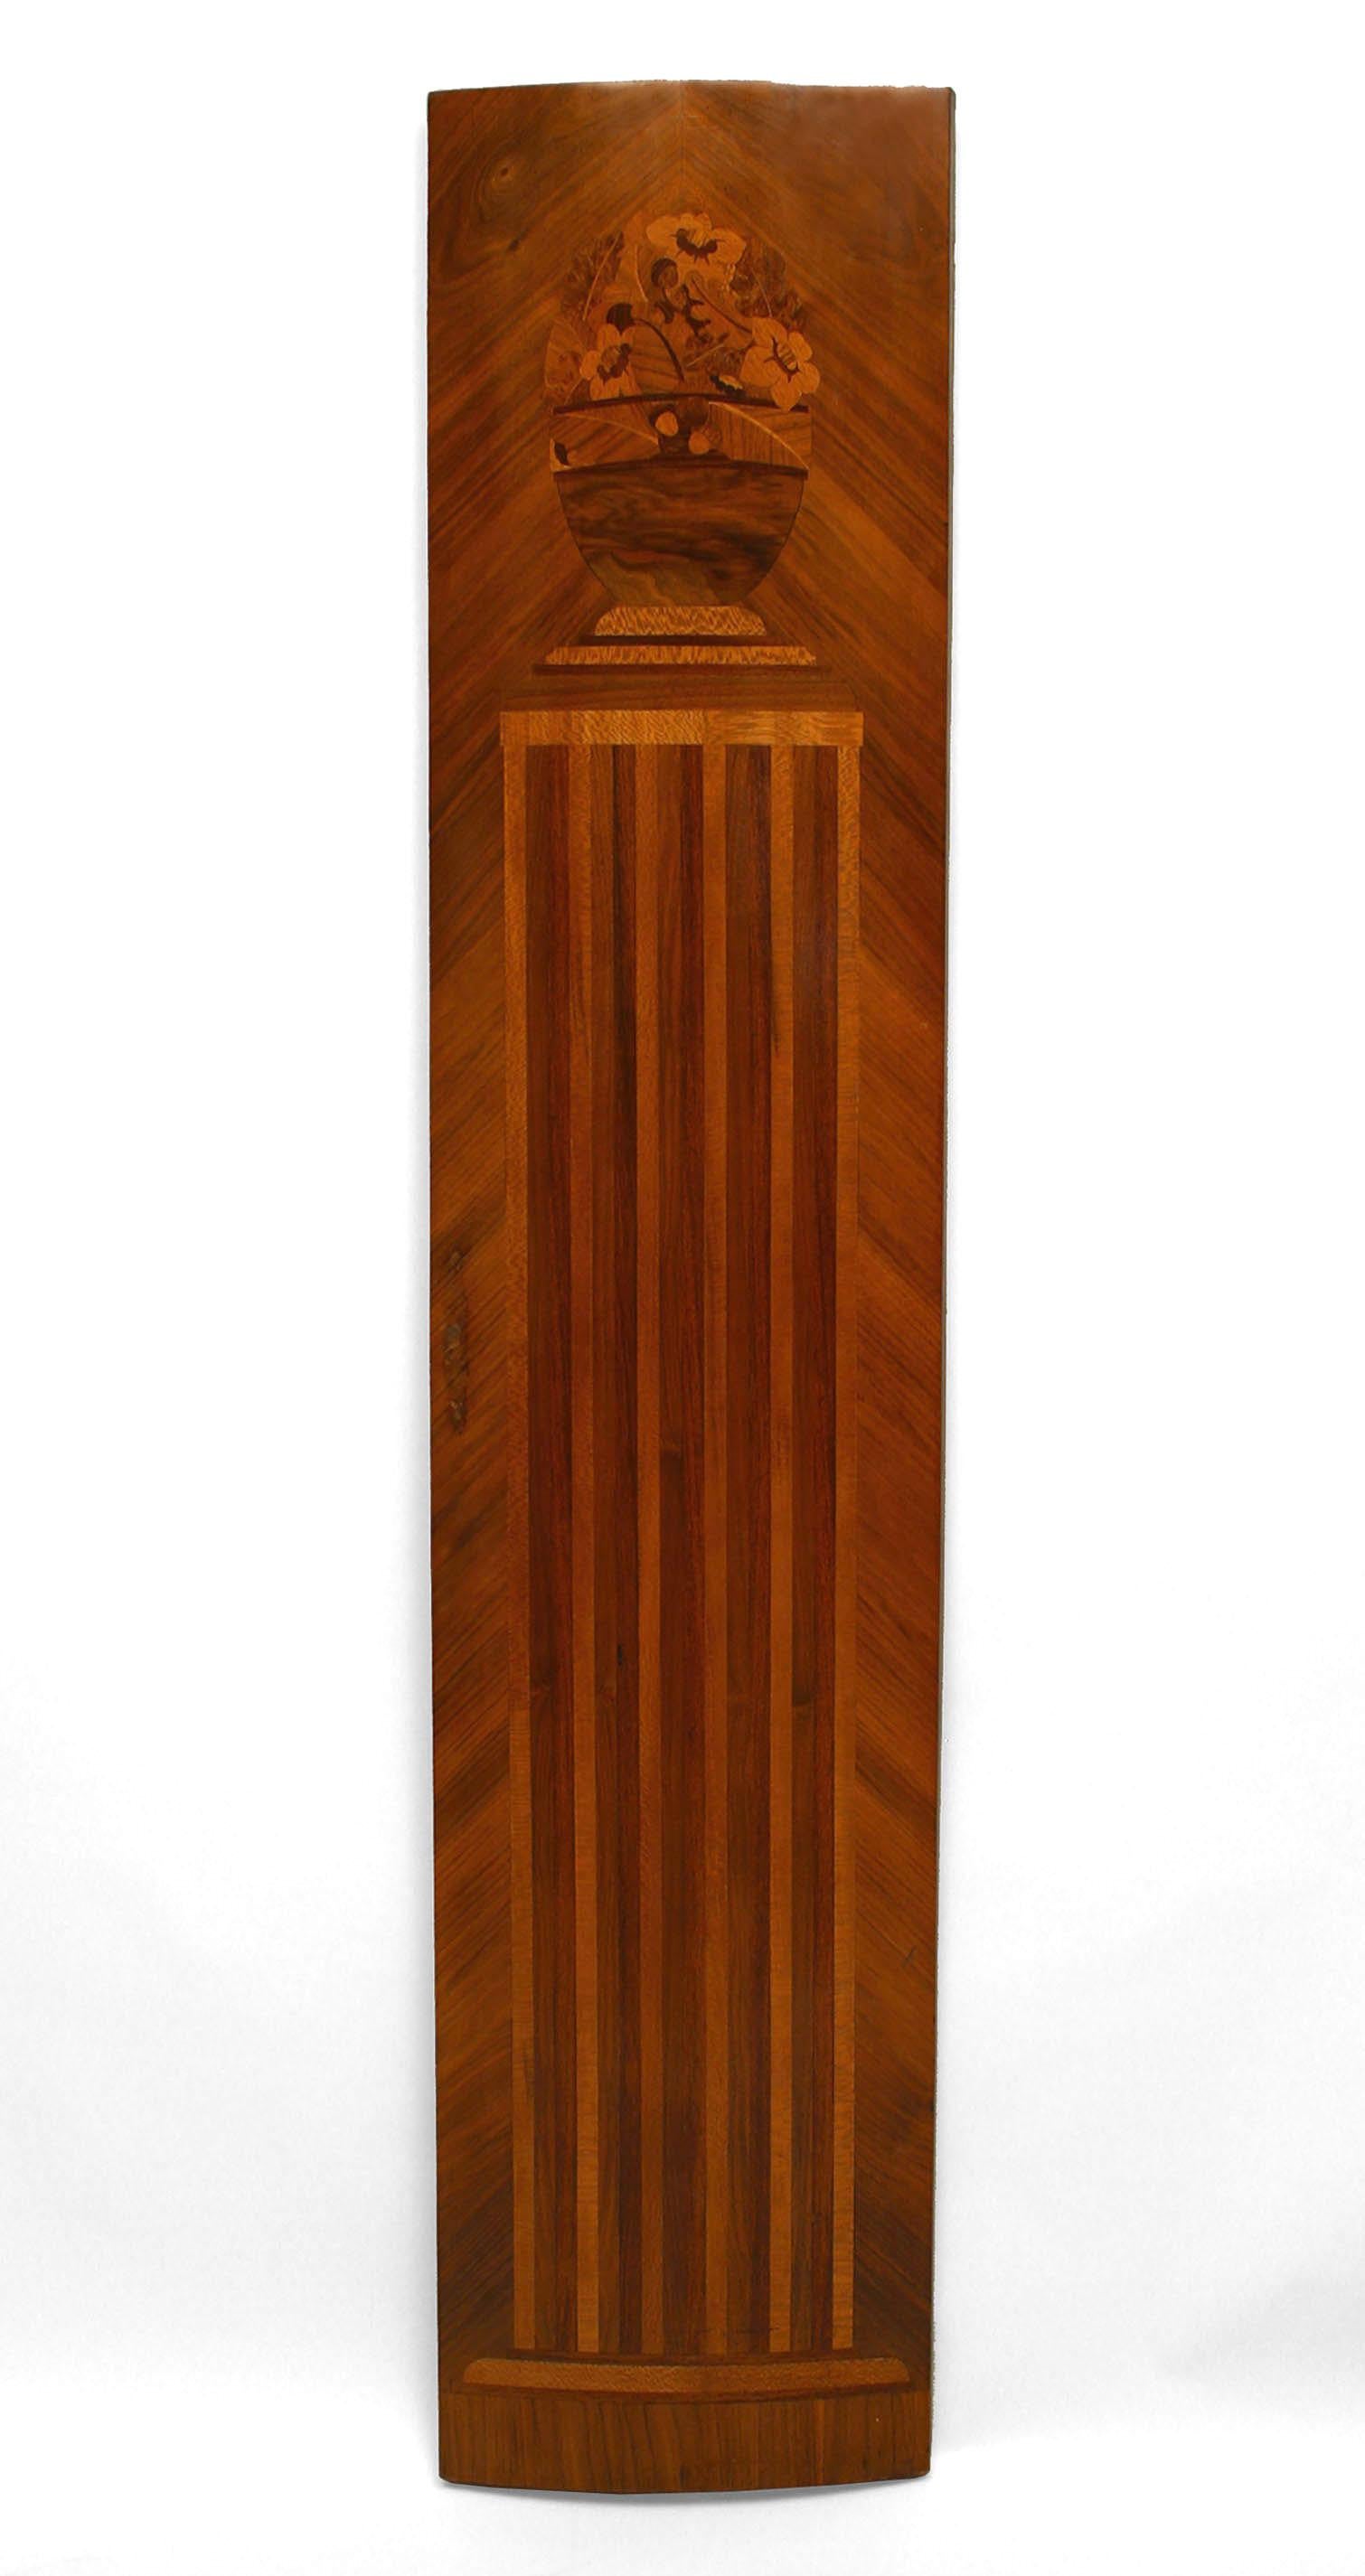 Pair of French Art Deco kingwood veneered pilaster panels with a slight convex shape and inlaid with various woods with a design of a fluted column supporting a vase with flowers (originally armoire doors).
 